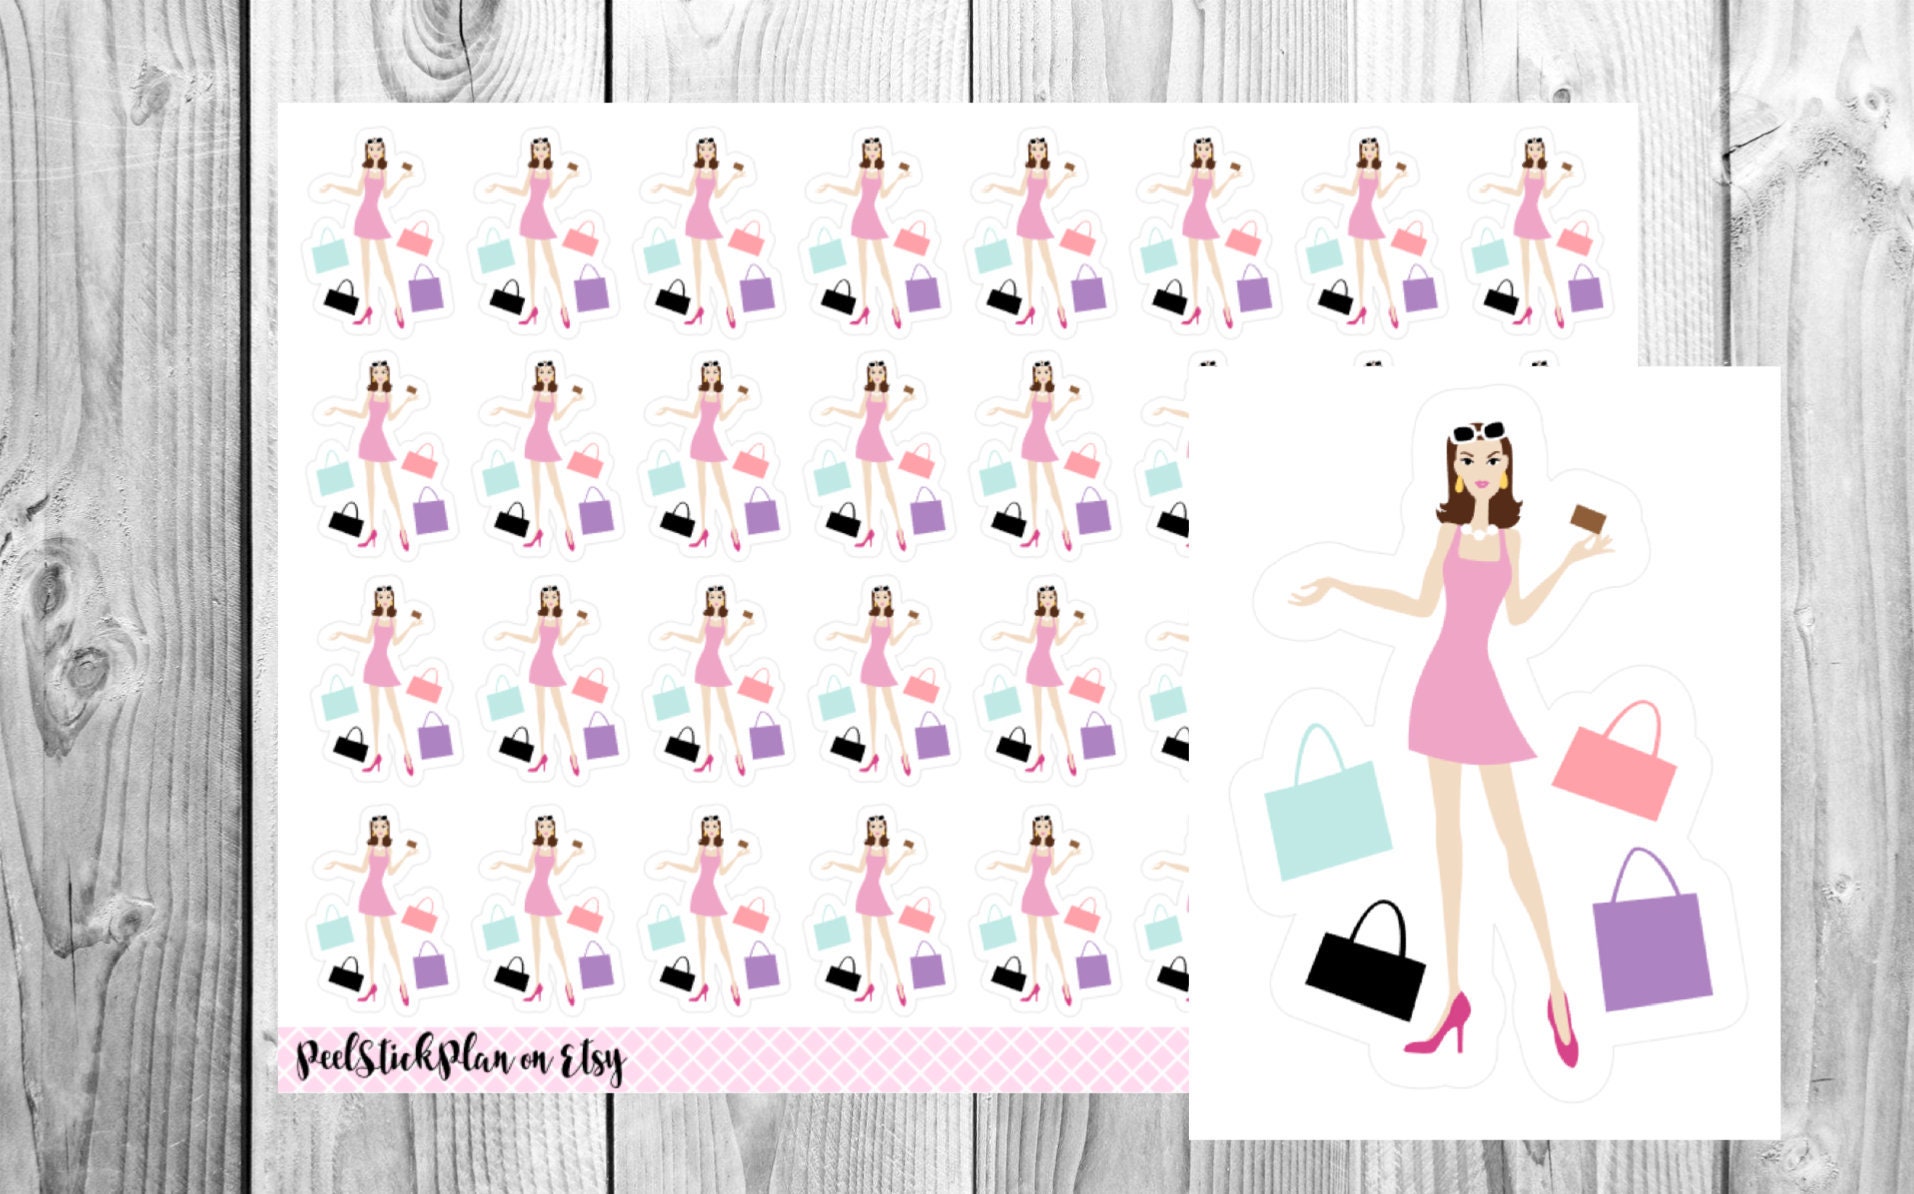 Girly Planner Stickers, Pink and Girly, Shopping Girl, Shopaholic, Sho –  Starr Plans